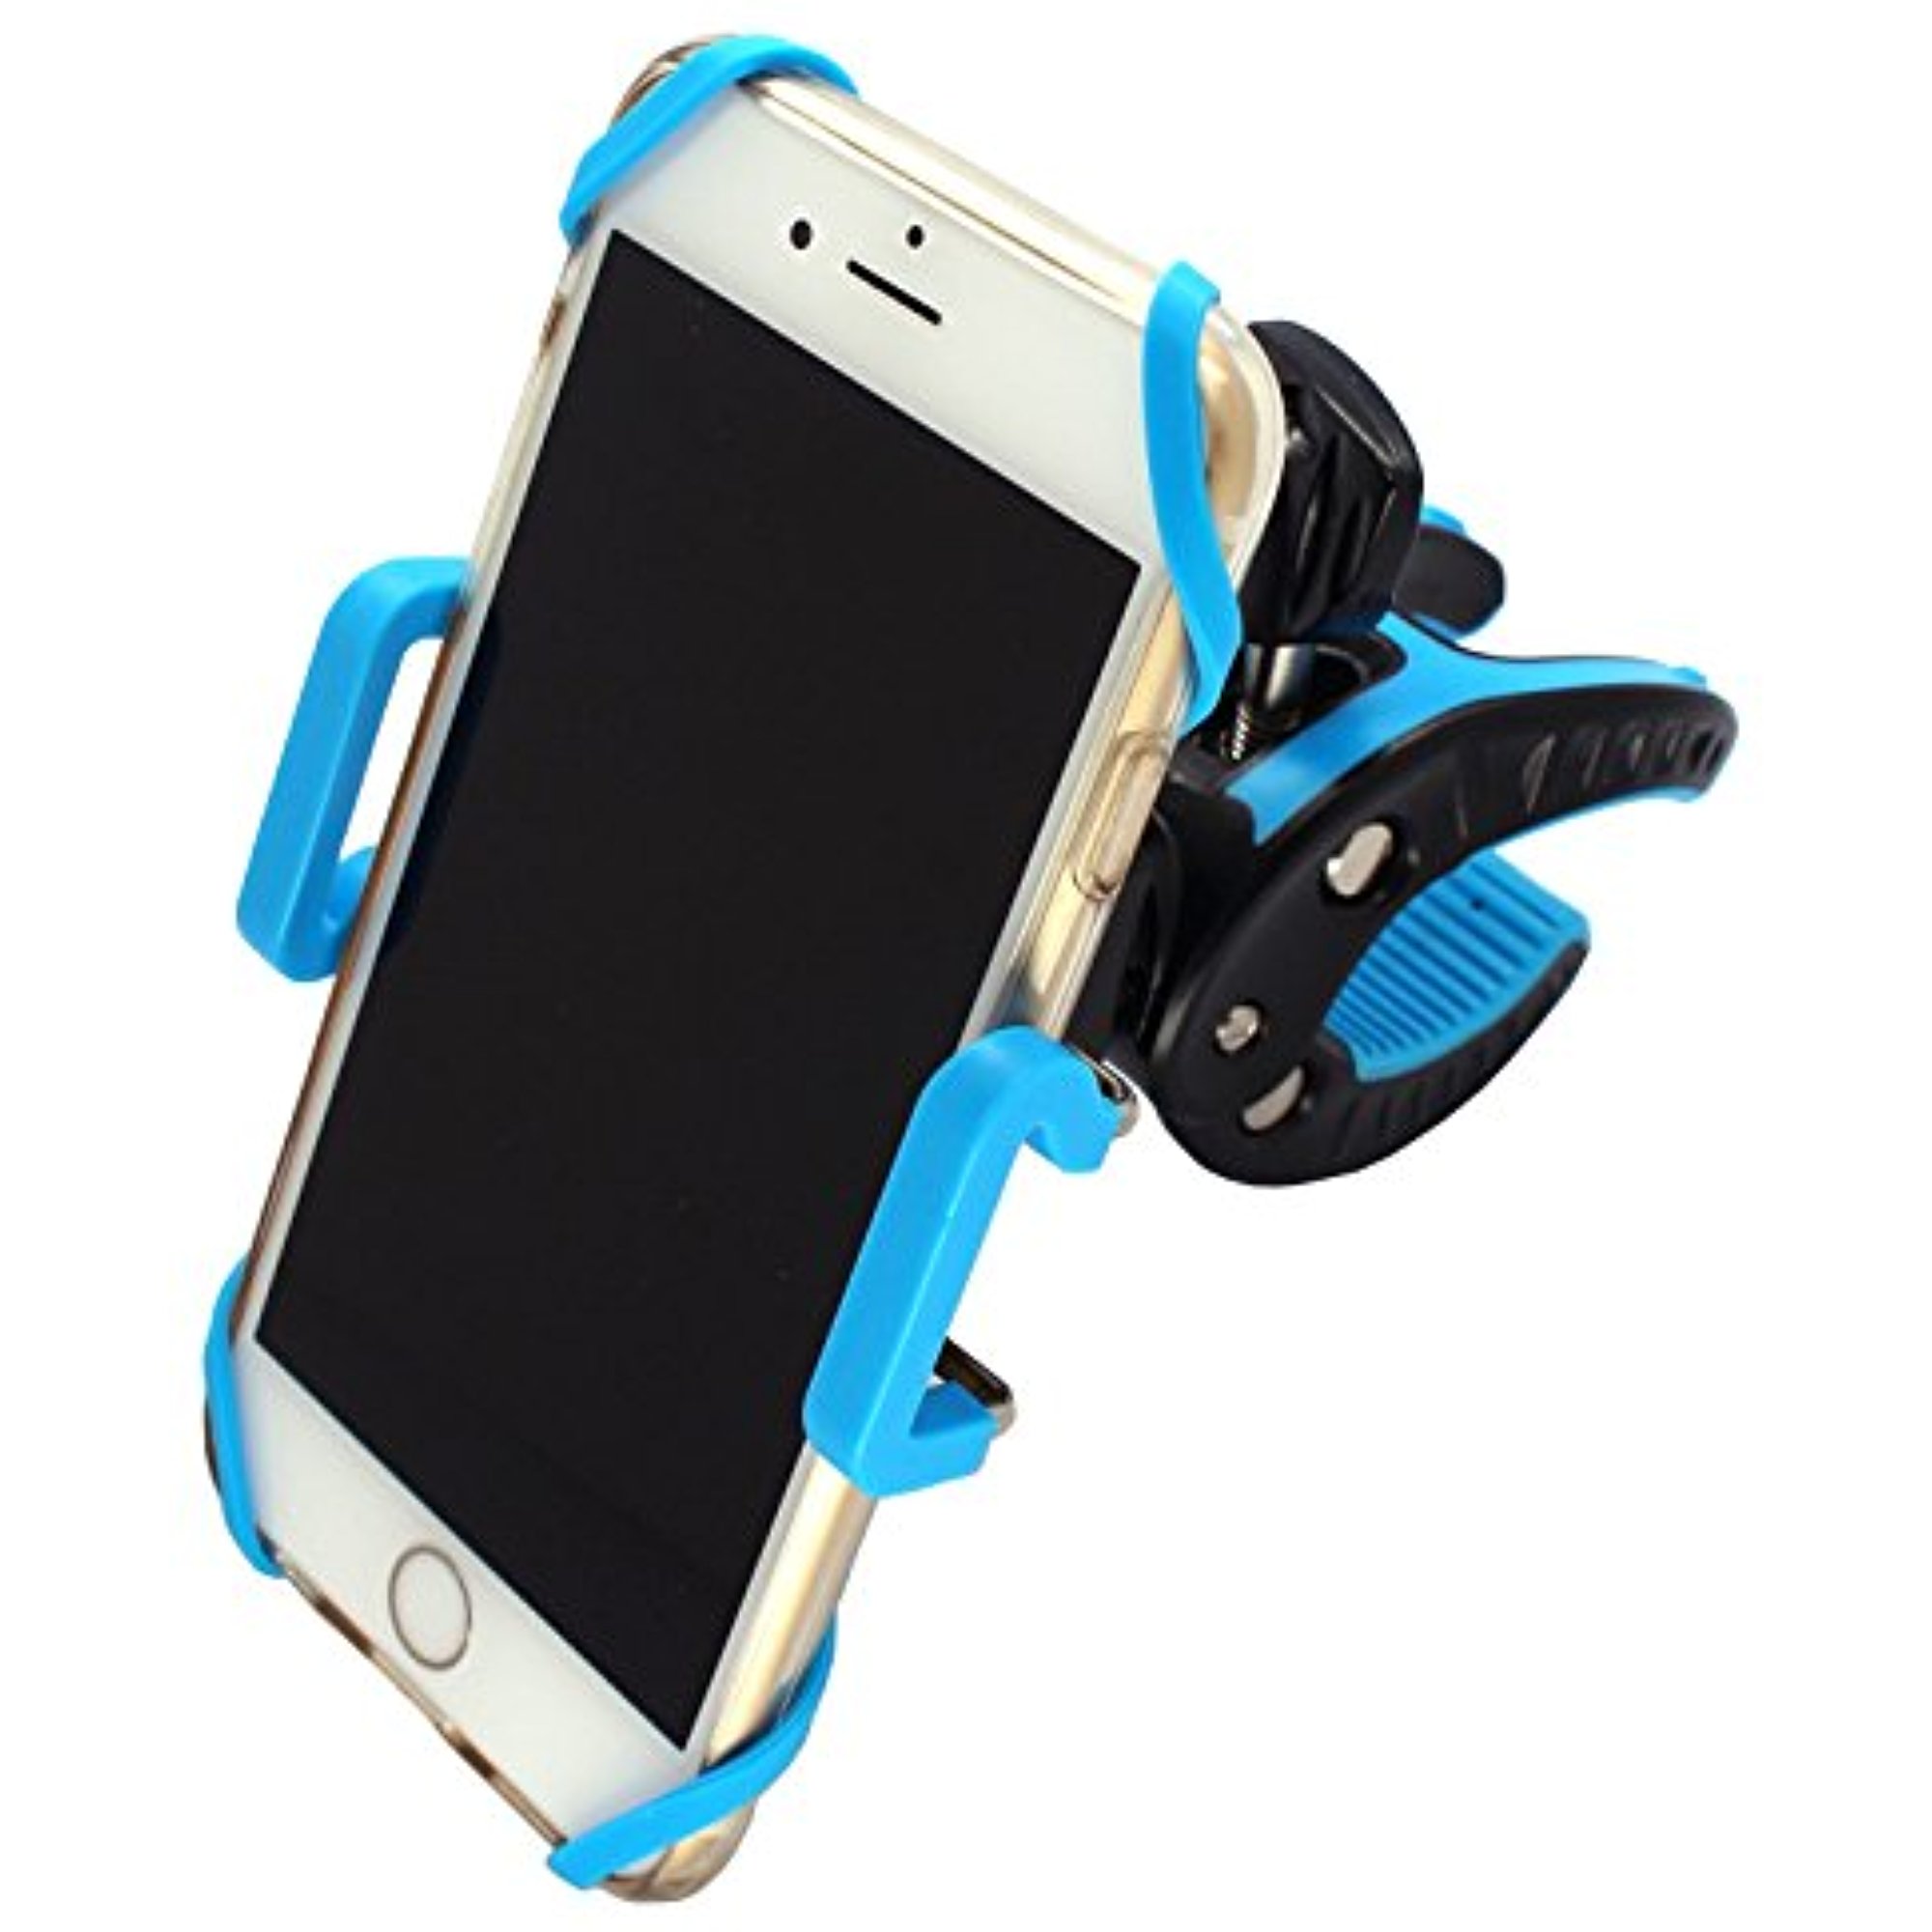 Patent Designed Mobile Catch Grab Everywhere Universal Cell Phone Bicycle Rack Handlebar & Motorcycle Holder Cradle for iPhone 7/6/6S/6S plus/5S/5C,Samsung Galaxy S3/S4/S5/S6/S7 Note 3/4/5,Nexus,HTC - image 1 of 1